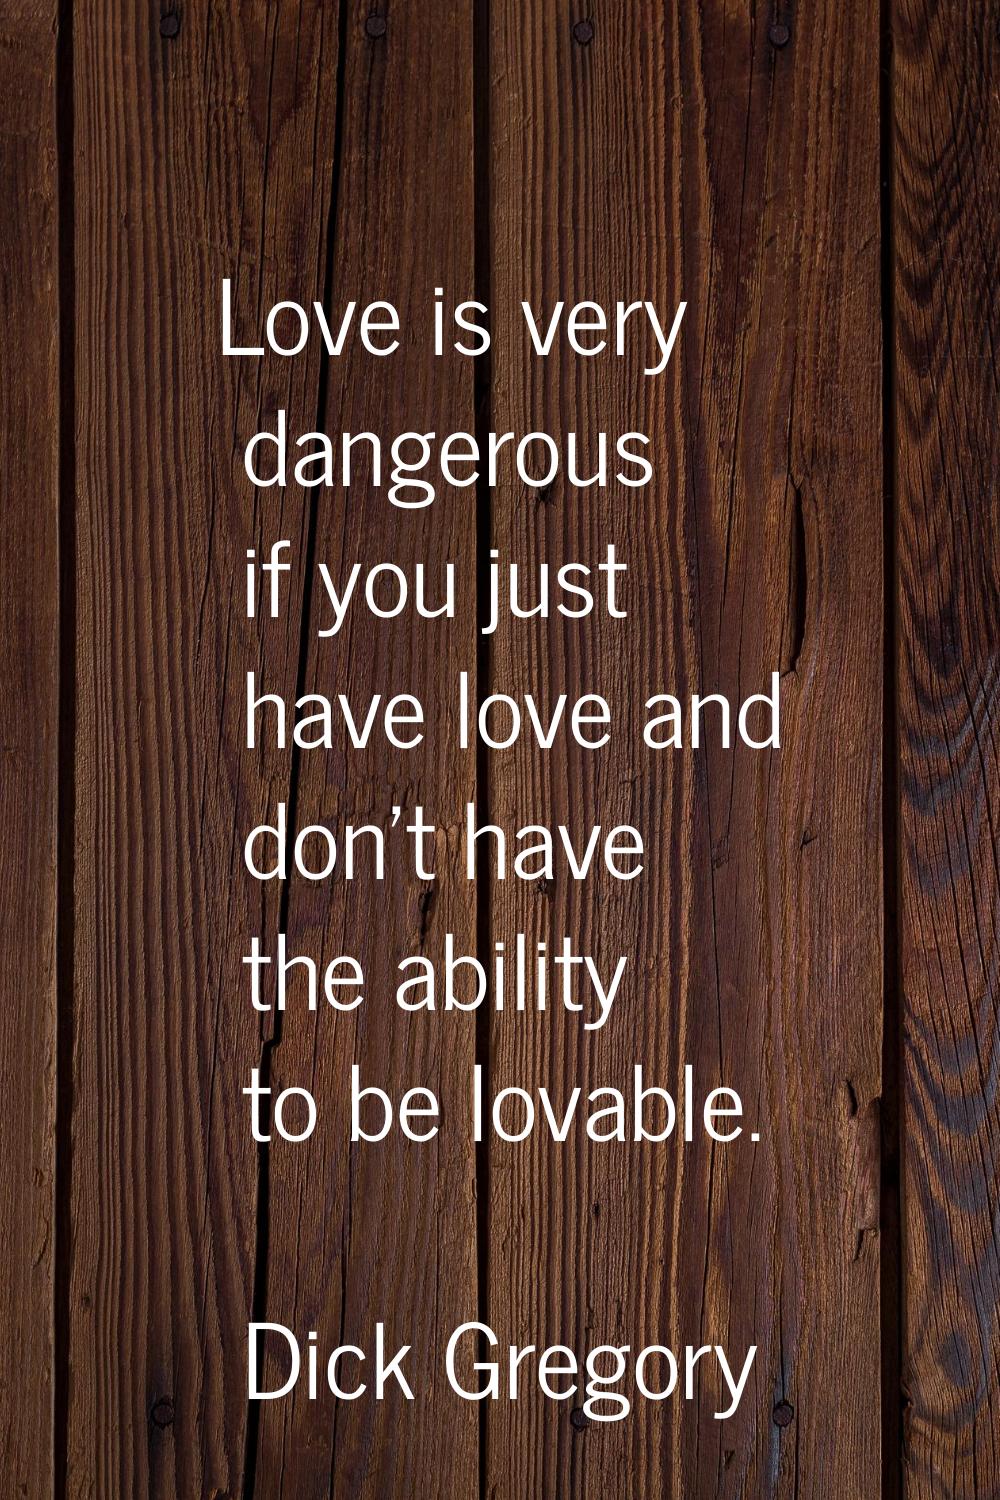 Love is very dangerous if you just have love and don't have the ability to be lovable.